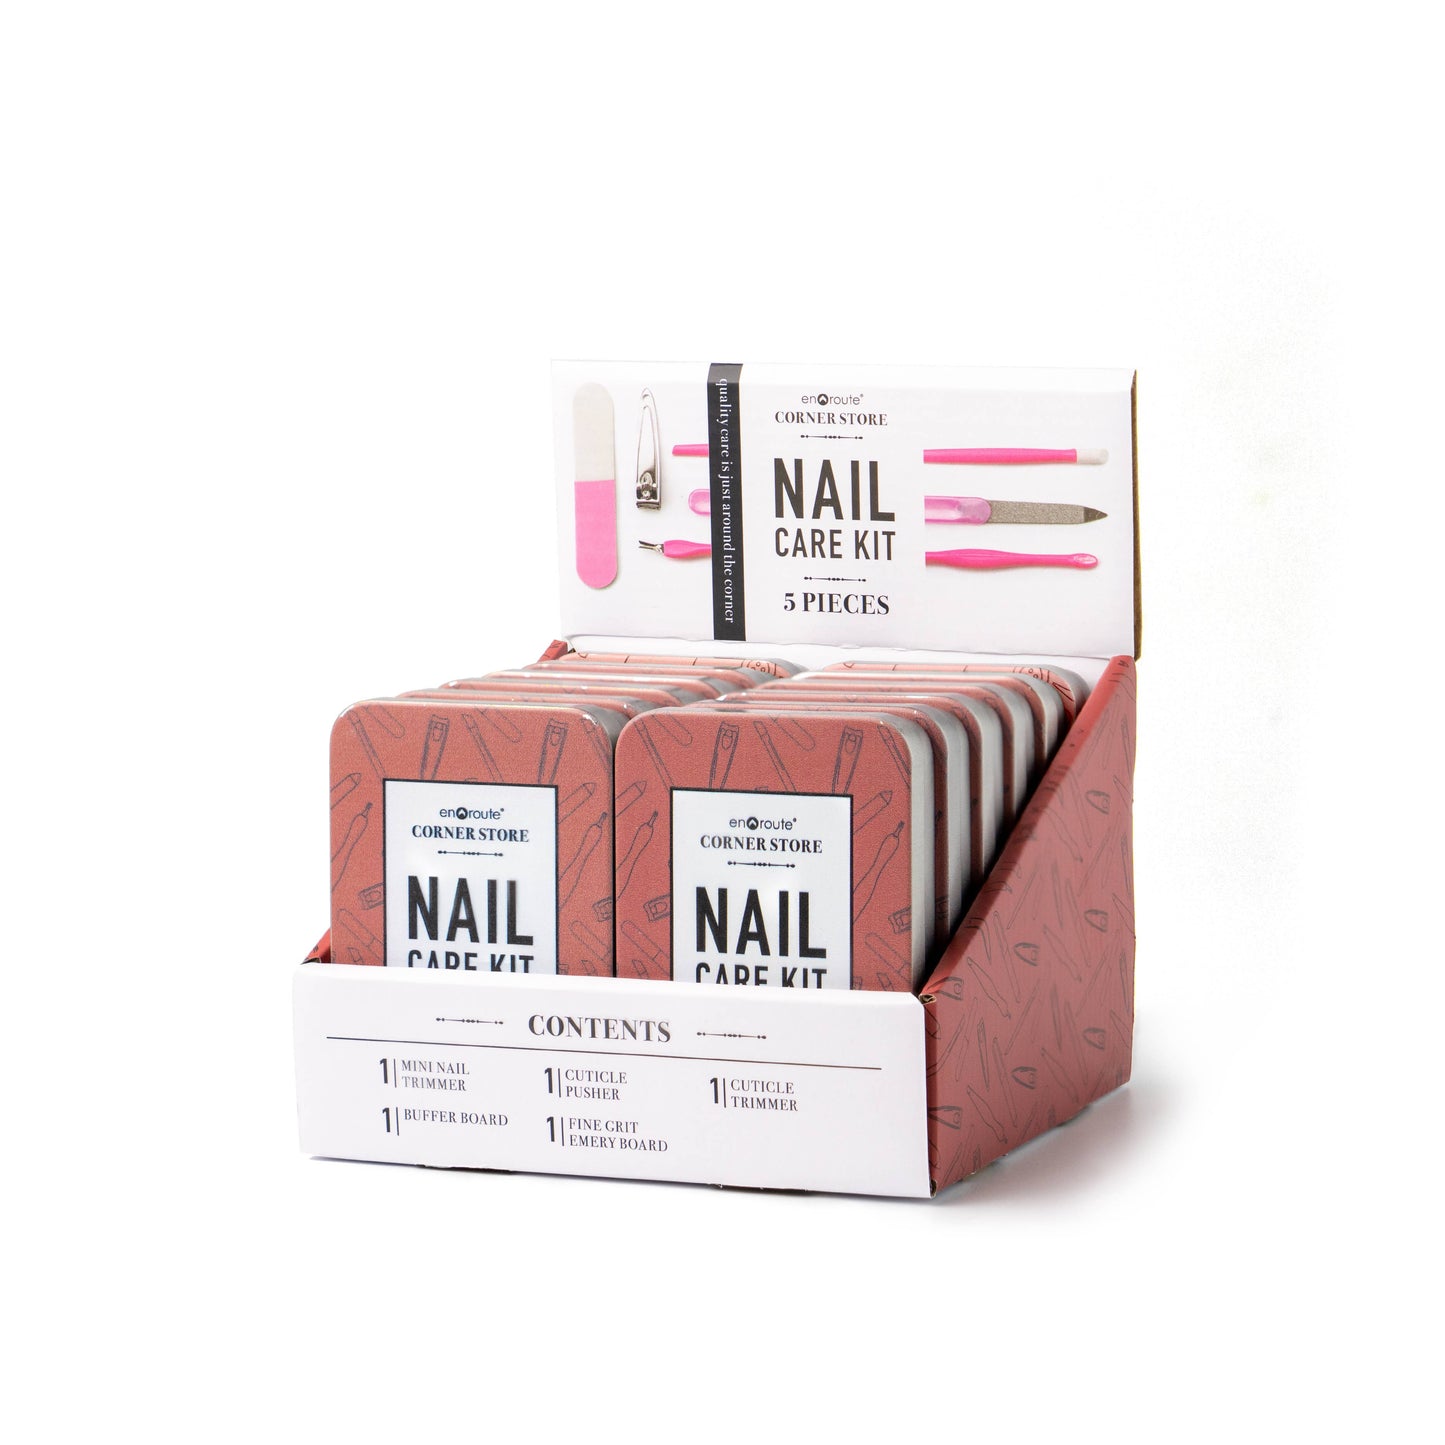 display showing multiple nail care kits against a white background